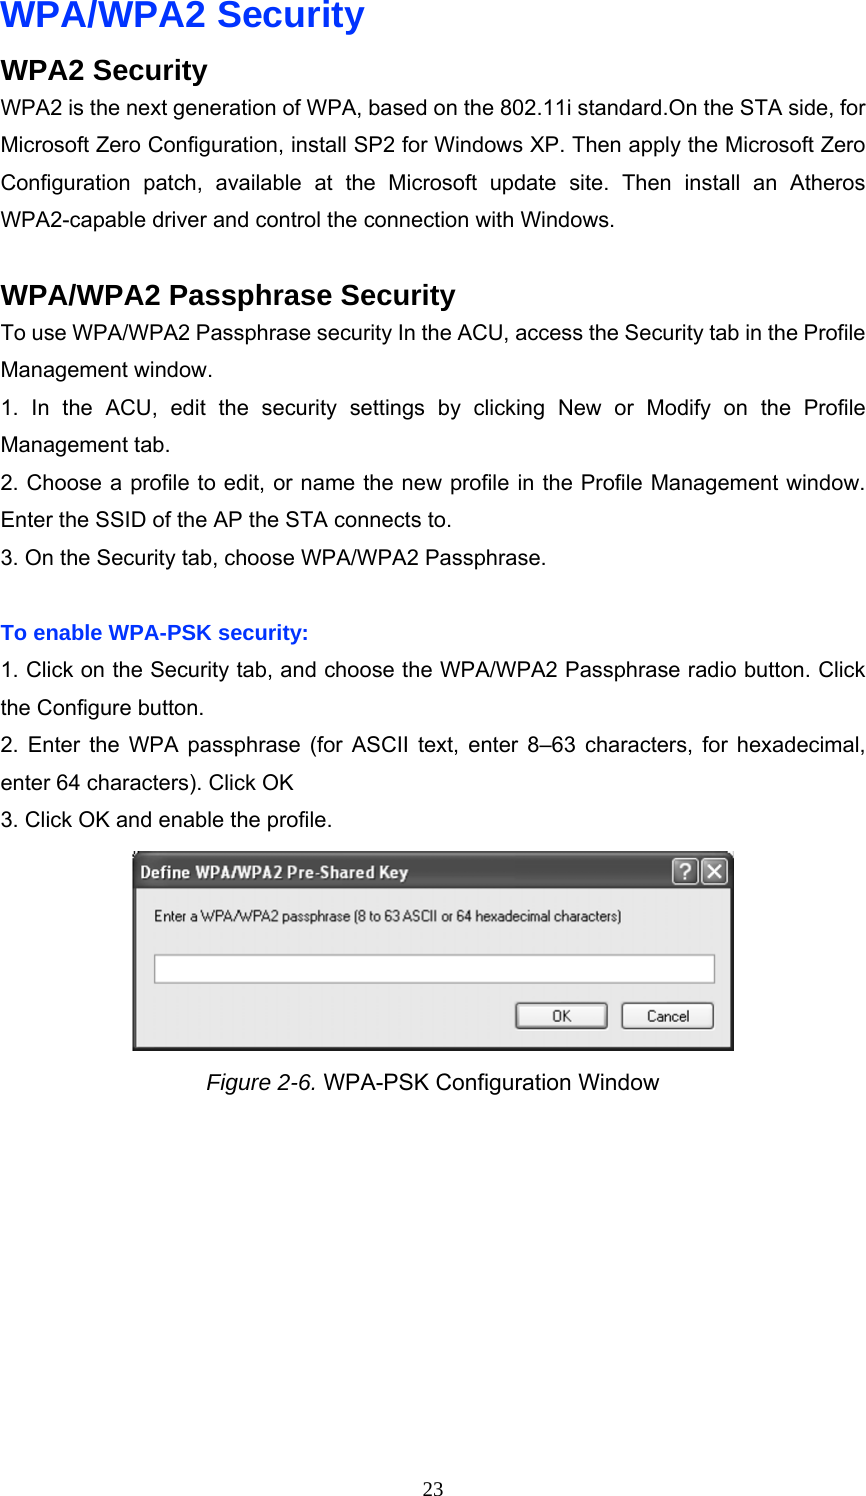 WPA/WPA2 Security WPA2 Security WPA2 is the next generation of WPA, based on the 802.11i standard.On the STA side, for Microsoft Zero Configuration, install SP2 for Windows XP. Then apply the Microsoft Zero Configuration patch, available at the Microsoft update site. Then install an Atheros WPA2-capable driver and control the connection with Windows.  WPA/WPA2 Passphrase Security To use WPA/WPA2 Passphrase security In the ACU, access the Security tab in the Profile Management window. 1. In the ACU, edit the security settings by clicking New or Modify on the Profile Management tab. 2. Choose a profile to edit, or name the new profile in the Profile Management window. Enter the SSID of the AP the STA connects to. 3. On the Security tab, choose WPA/WPA2 Passphrase.  To enable WPA-PSK security: 1. Click on the Security tab, and choose the WPA/WPA2 Passphrase radio button. Click the Configure button. 2. Enter the WPA passphrase (for ASCII text, enter 8–63 characters, for hexadecimal, enter 64 characters). Click OK 3. Click OK and enable the profile.  Figure 2-6. WPA-PSK Configuration Window  23